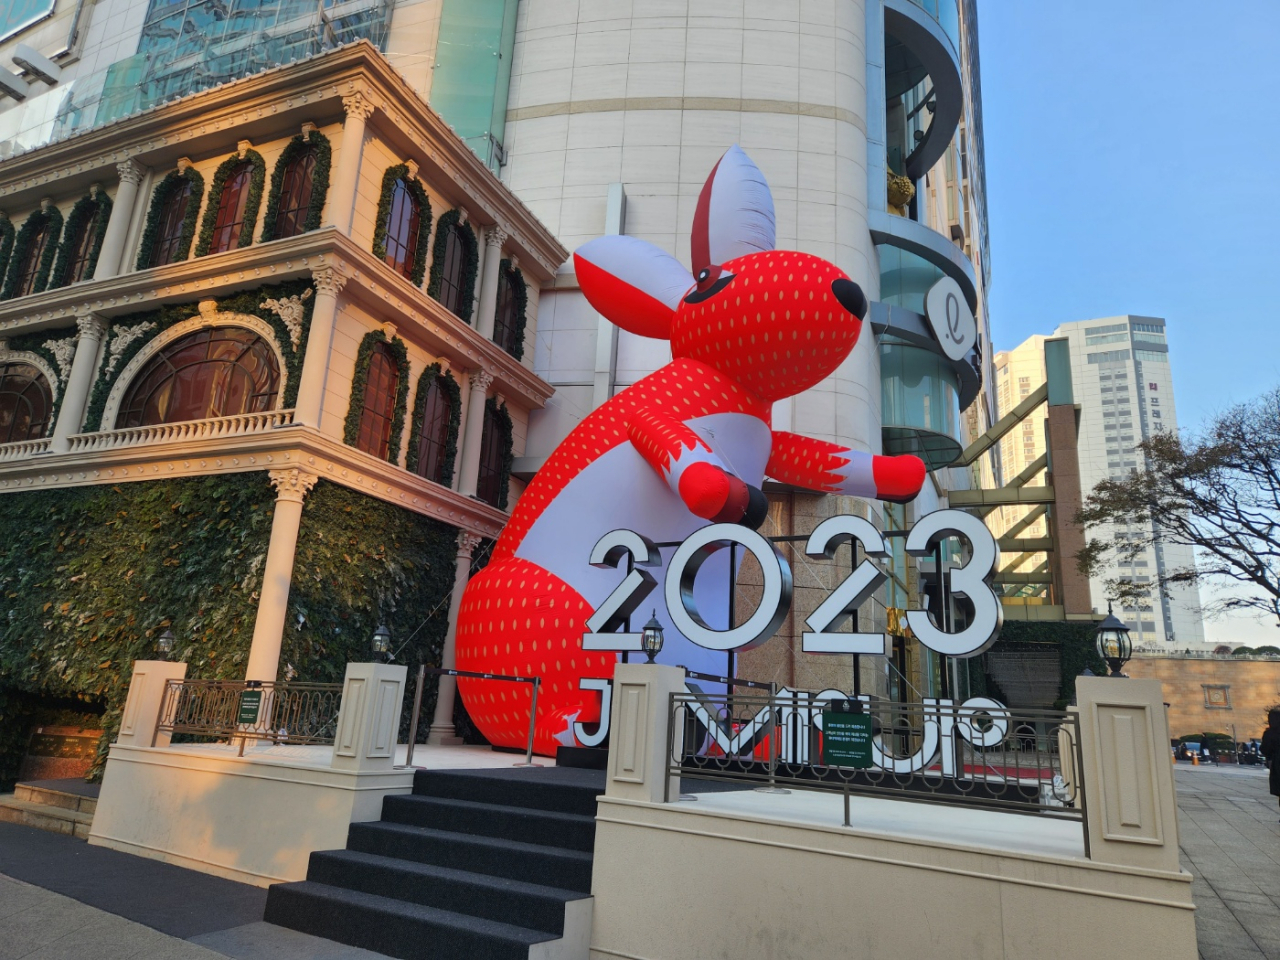 A 10-meter-tall inflatable rabbit installation is situated near the entrance to Lotte Department Store’s flagship branch in downtown Myeong-dong area of Seoul. (Choi Jae-hee/The Korea Herald)